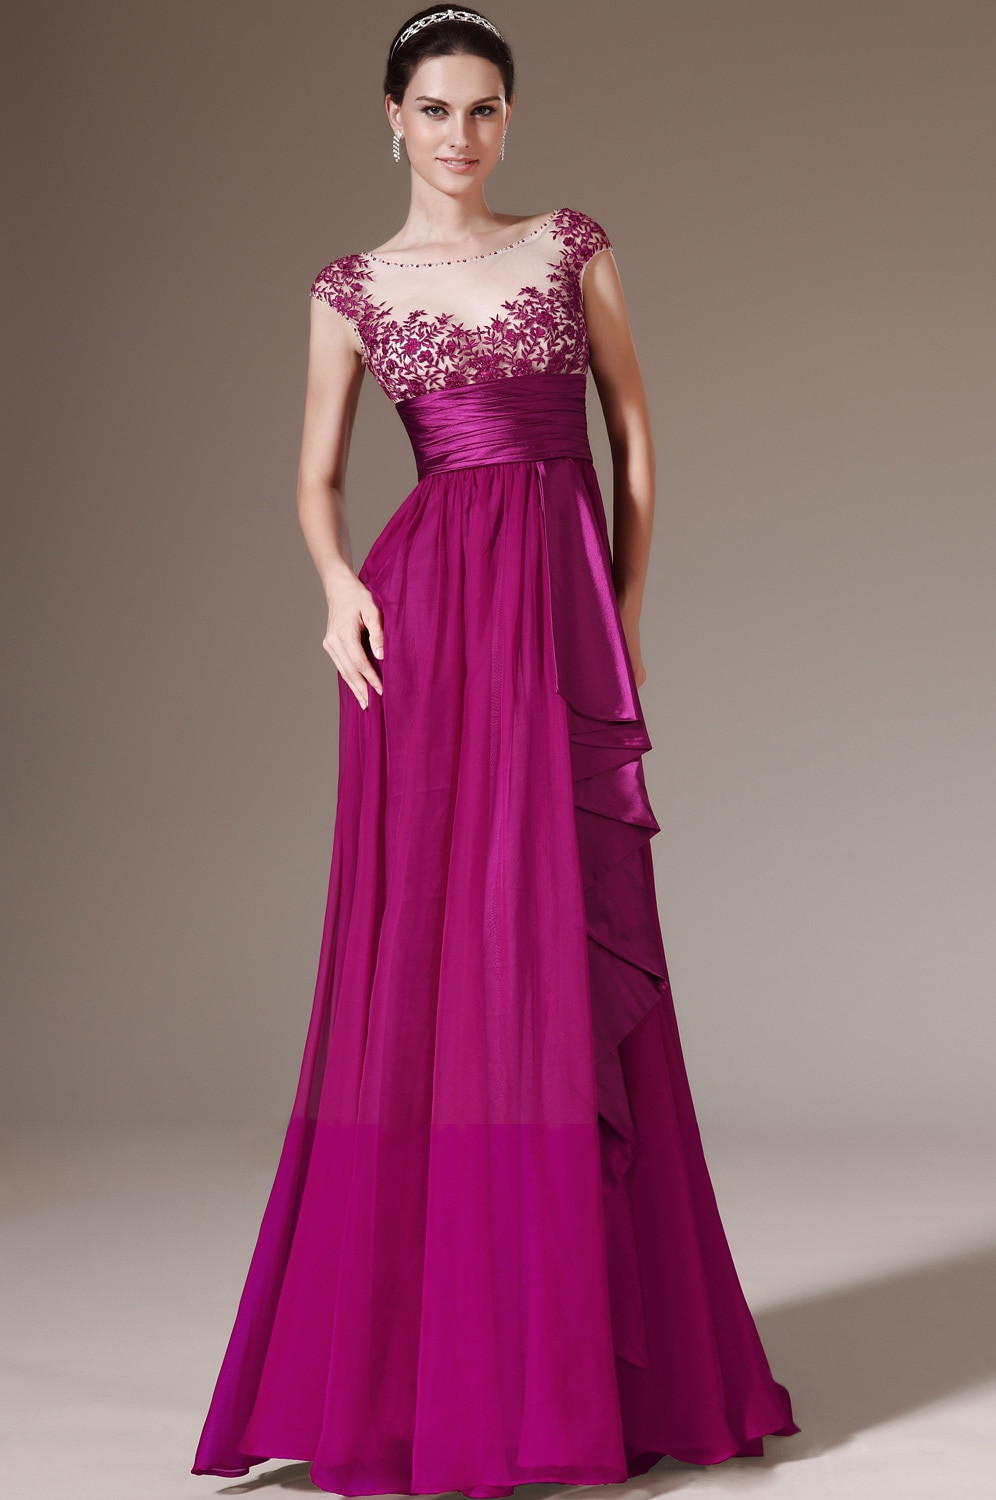 Evening Gowns For Wedding
 Newest Style Cap Sleeves Appliques Empire Sash Purple